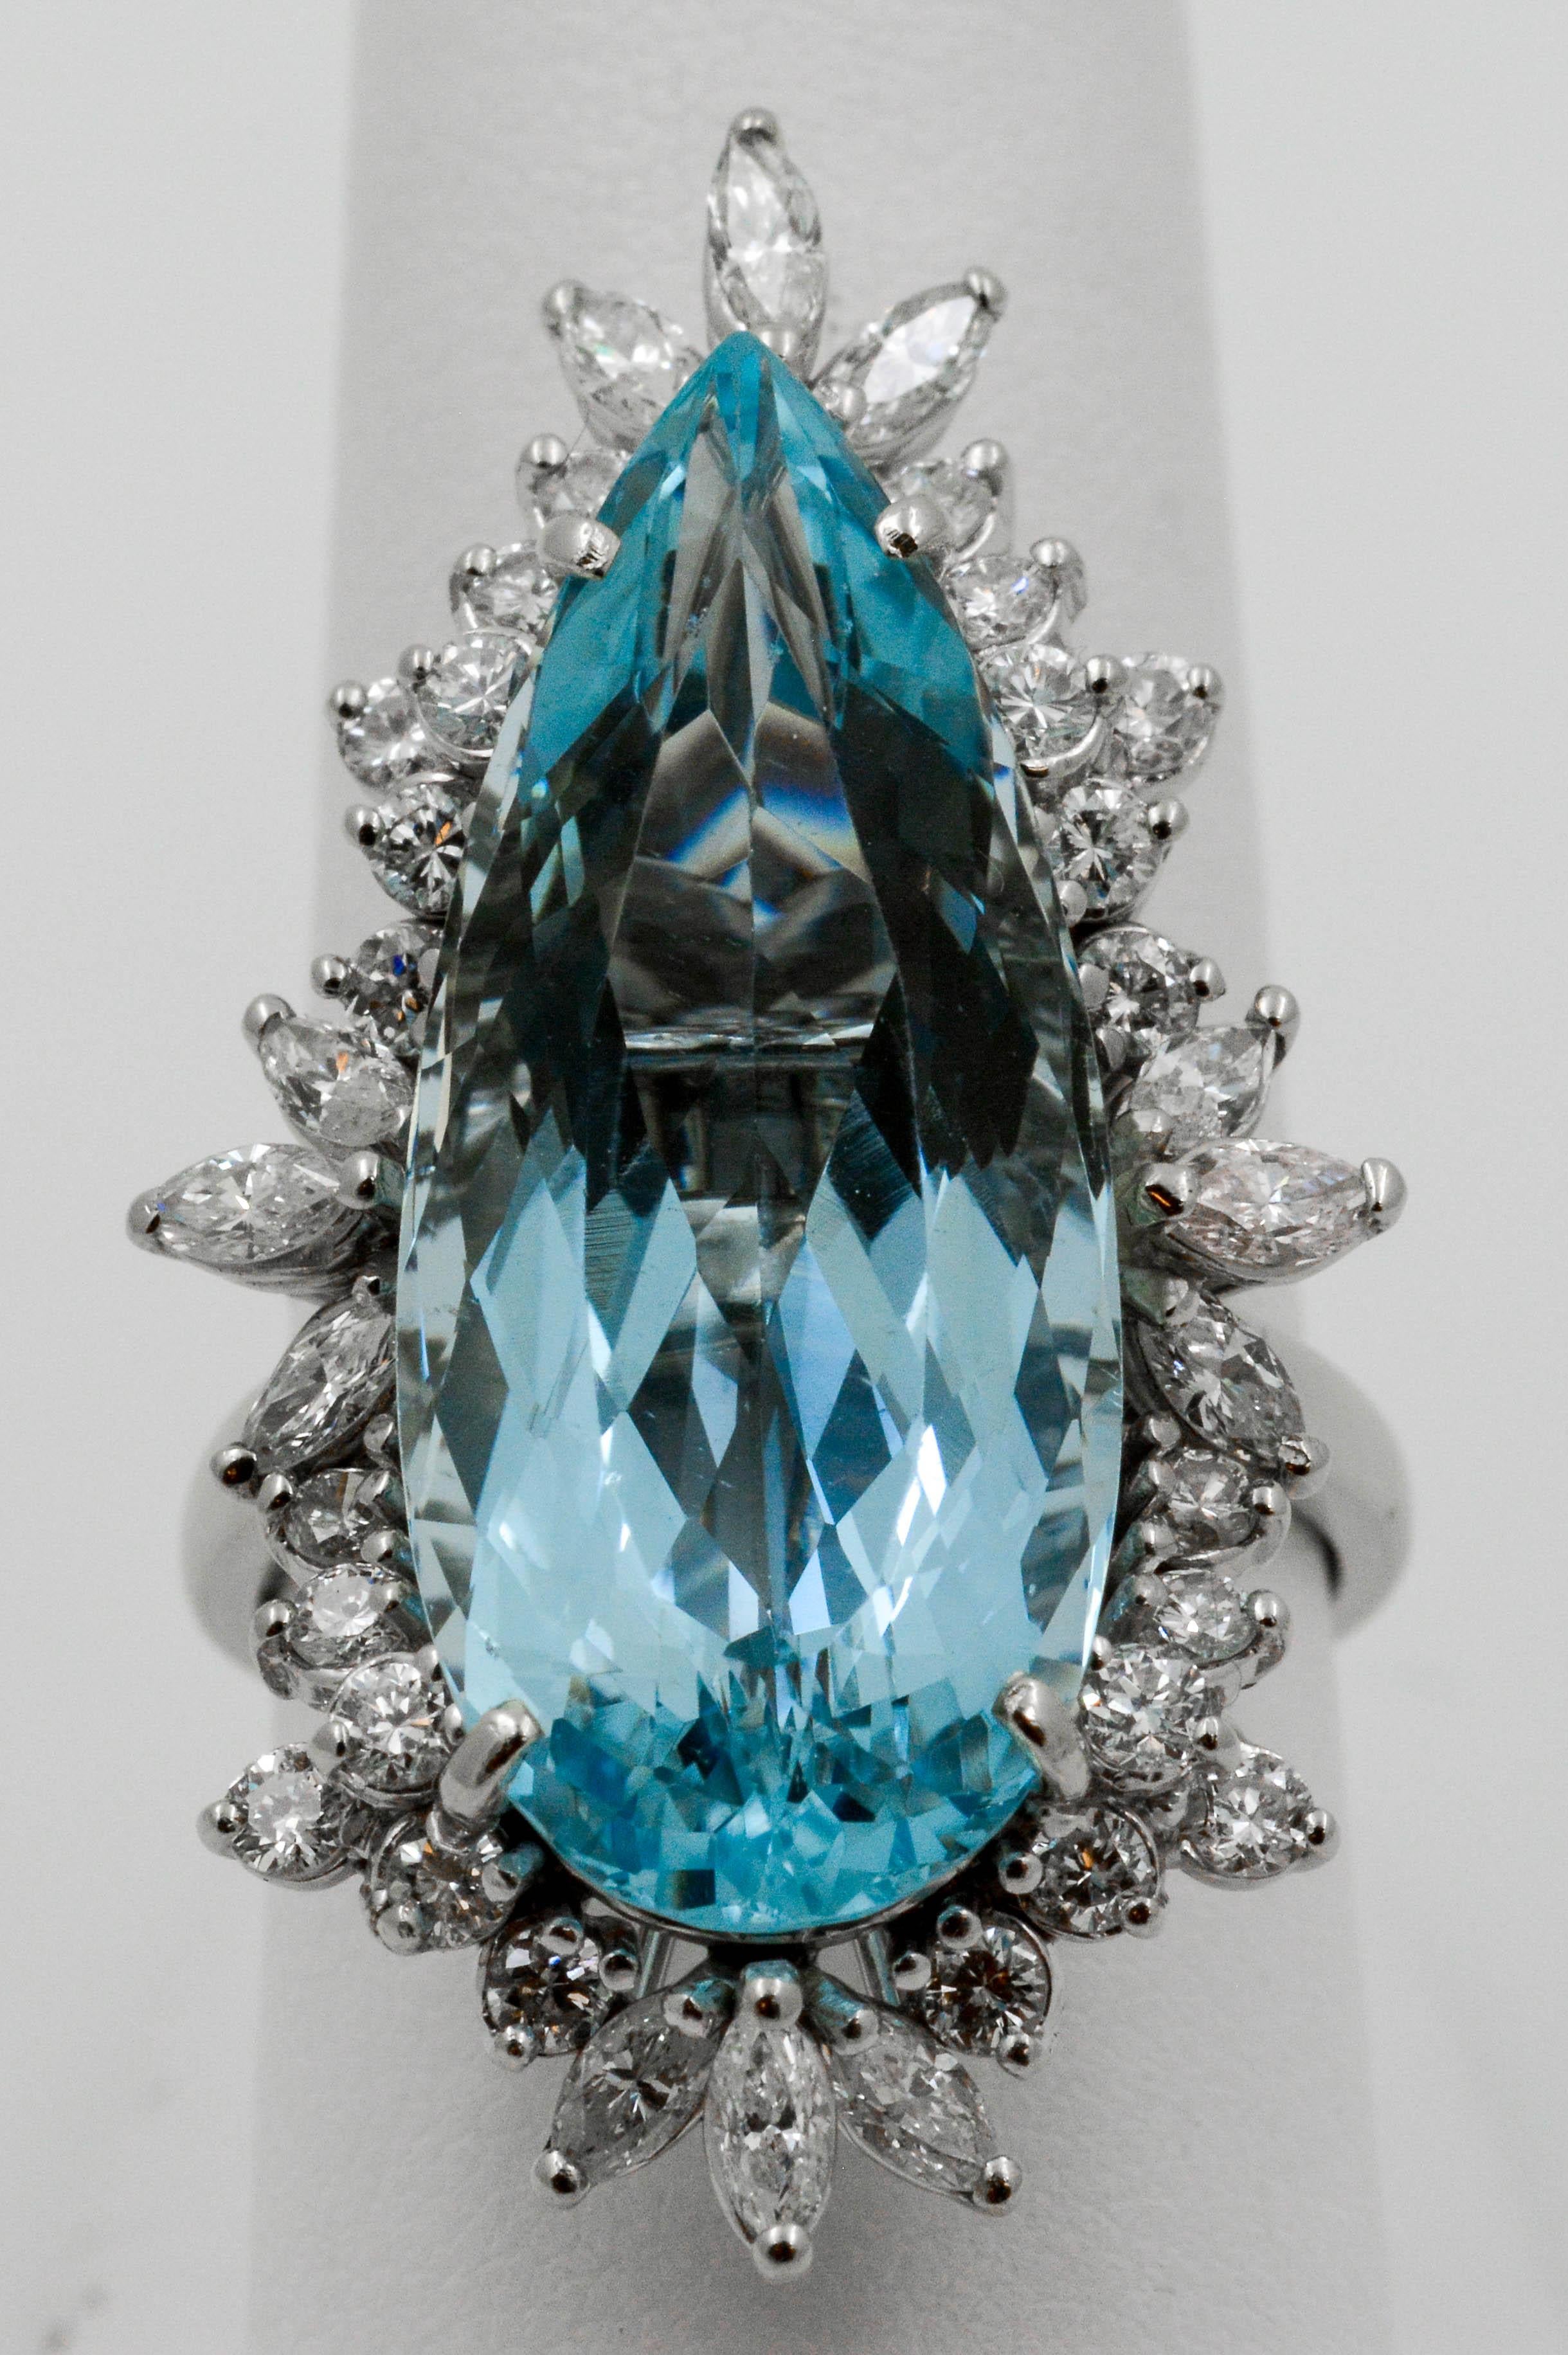 Circa 1970s mid-century modern 14 Karat white gold ring set with one pear shape Aquamarine 16.80 carat total weight (27.9 mm x 12.15 mm) surrounded with 12 marquis cut diamonds .60 carat total weight, and 24 round brilliant cut diamonds .72 carat